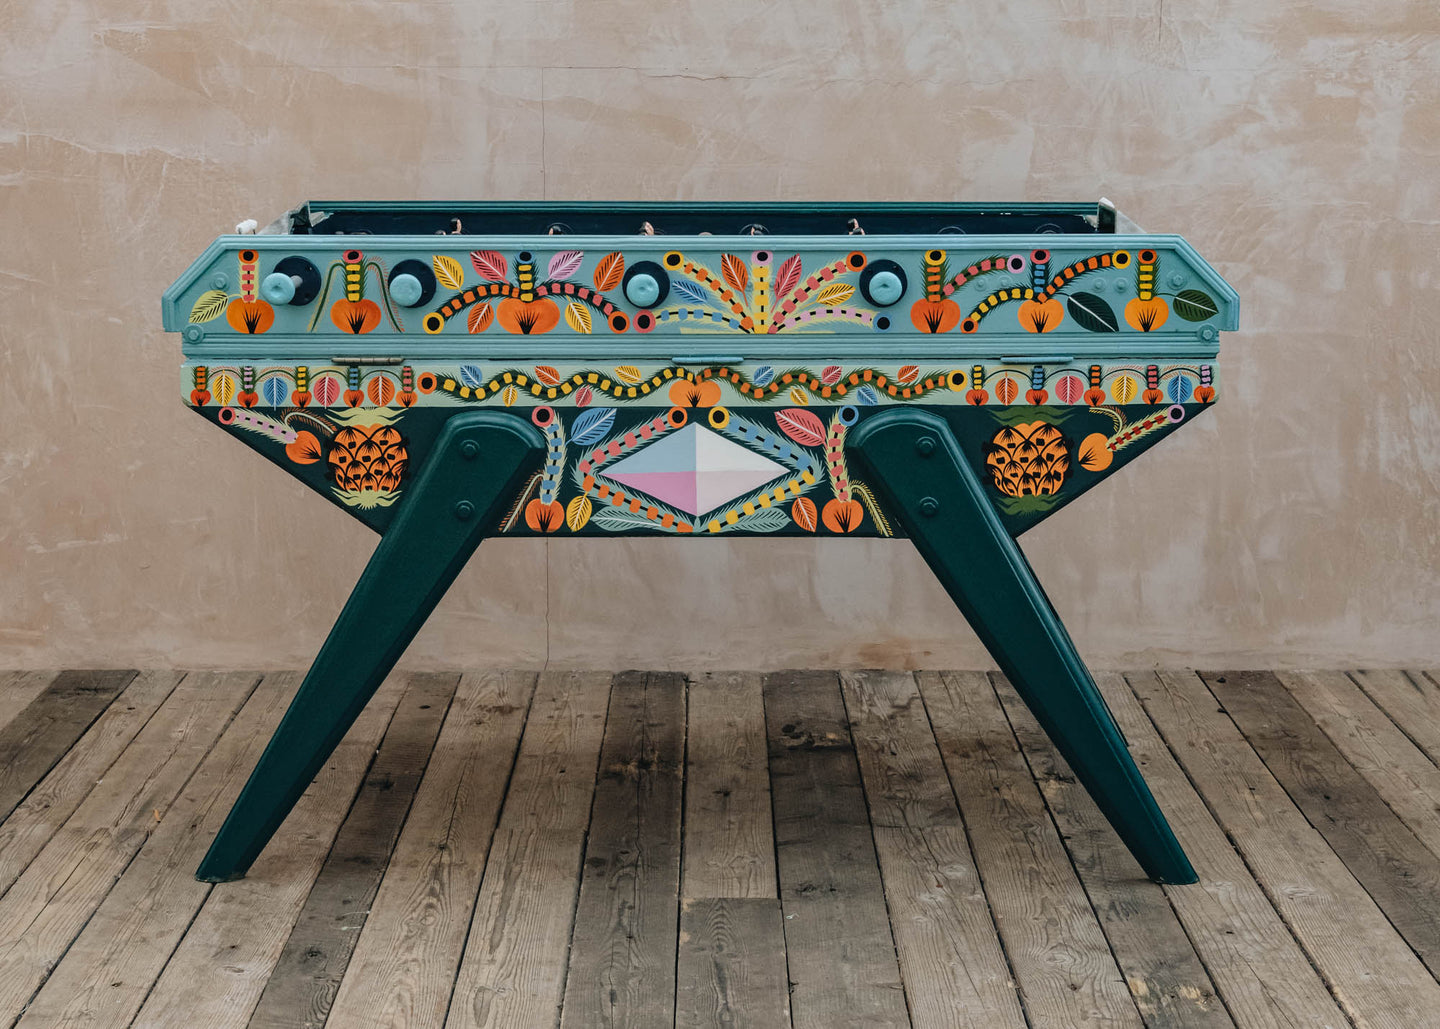 Tribus & Royaumes Vintage Football Table in Teal and Green